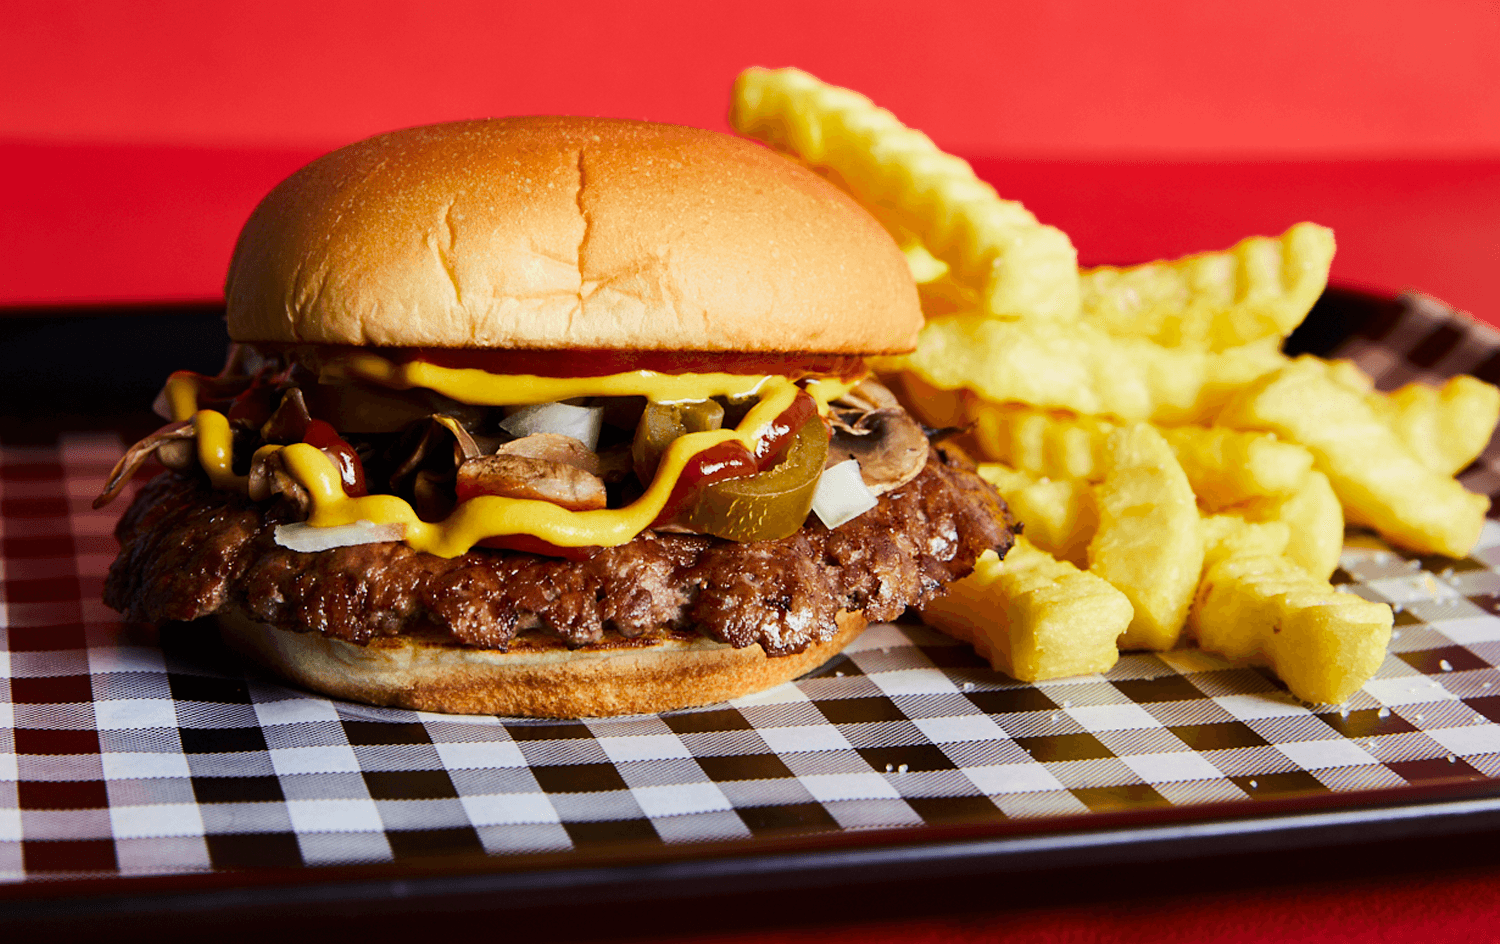 A juicy burger sitting atop tartan printed paper. Pickles hang out the side of one of Melbourne's best burgers.